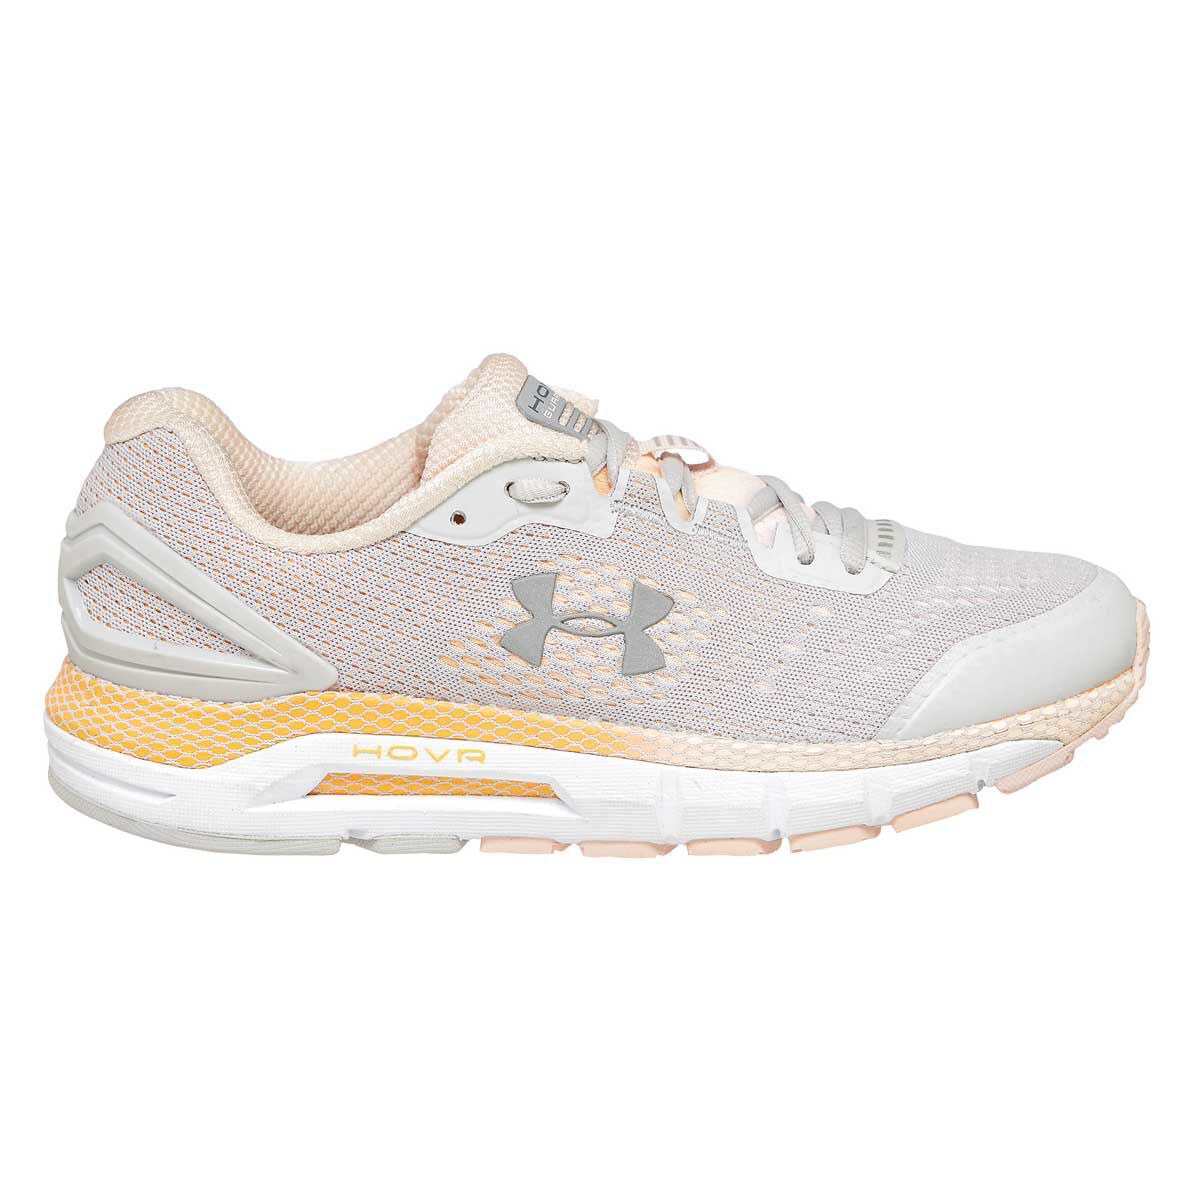 under armour grey and orange shoes